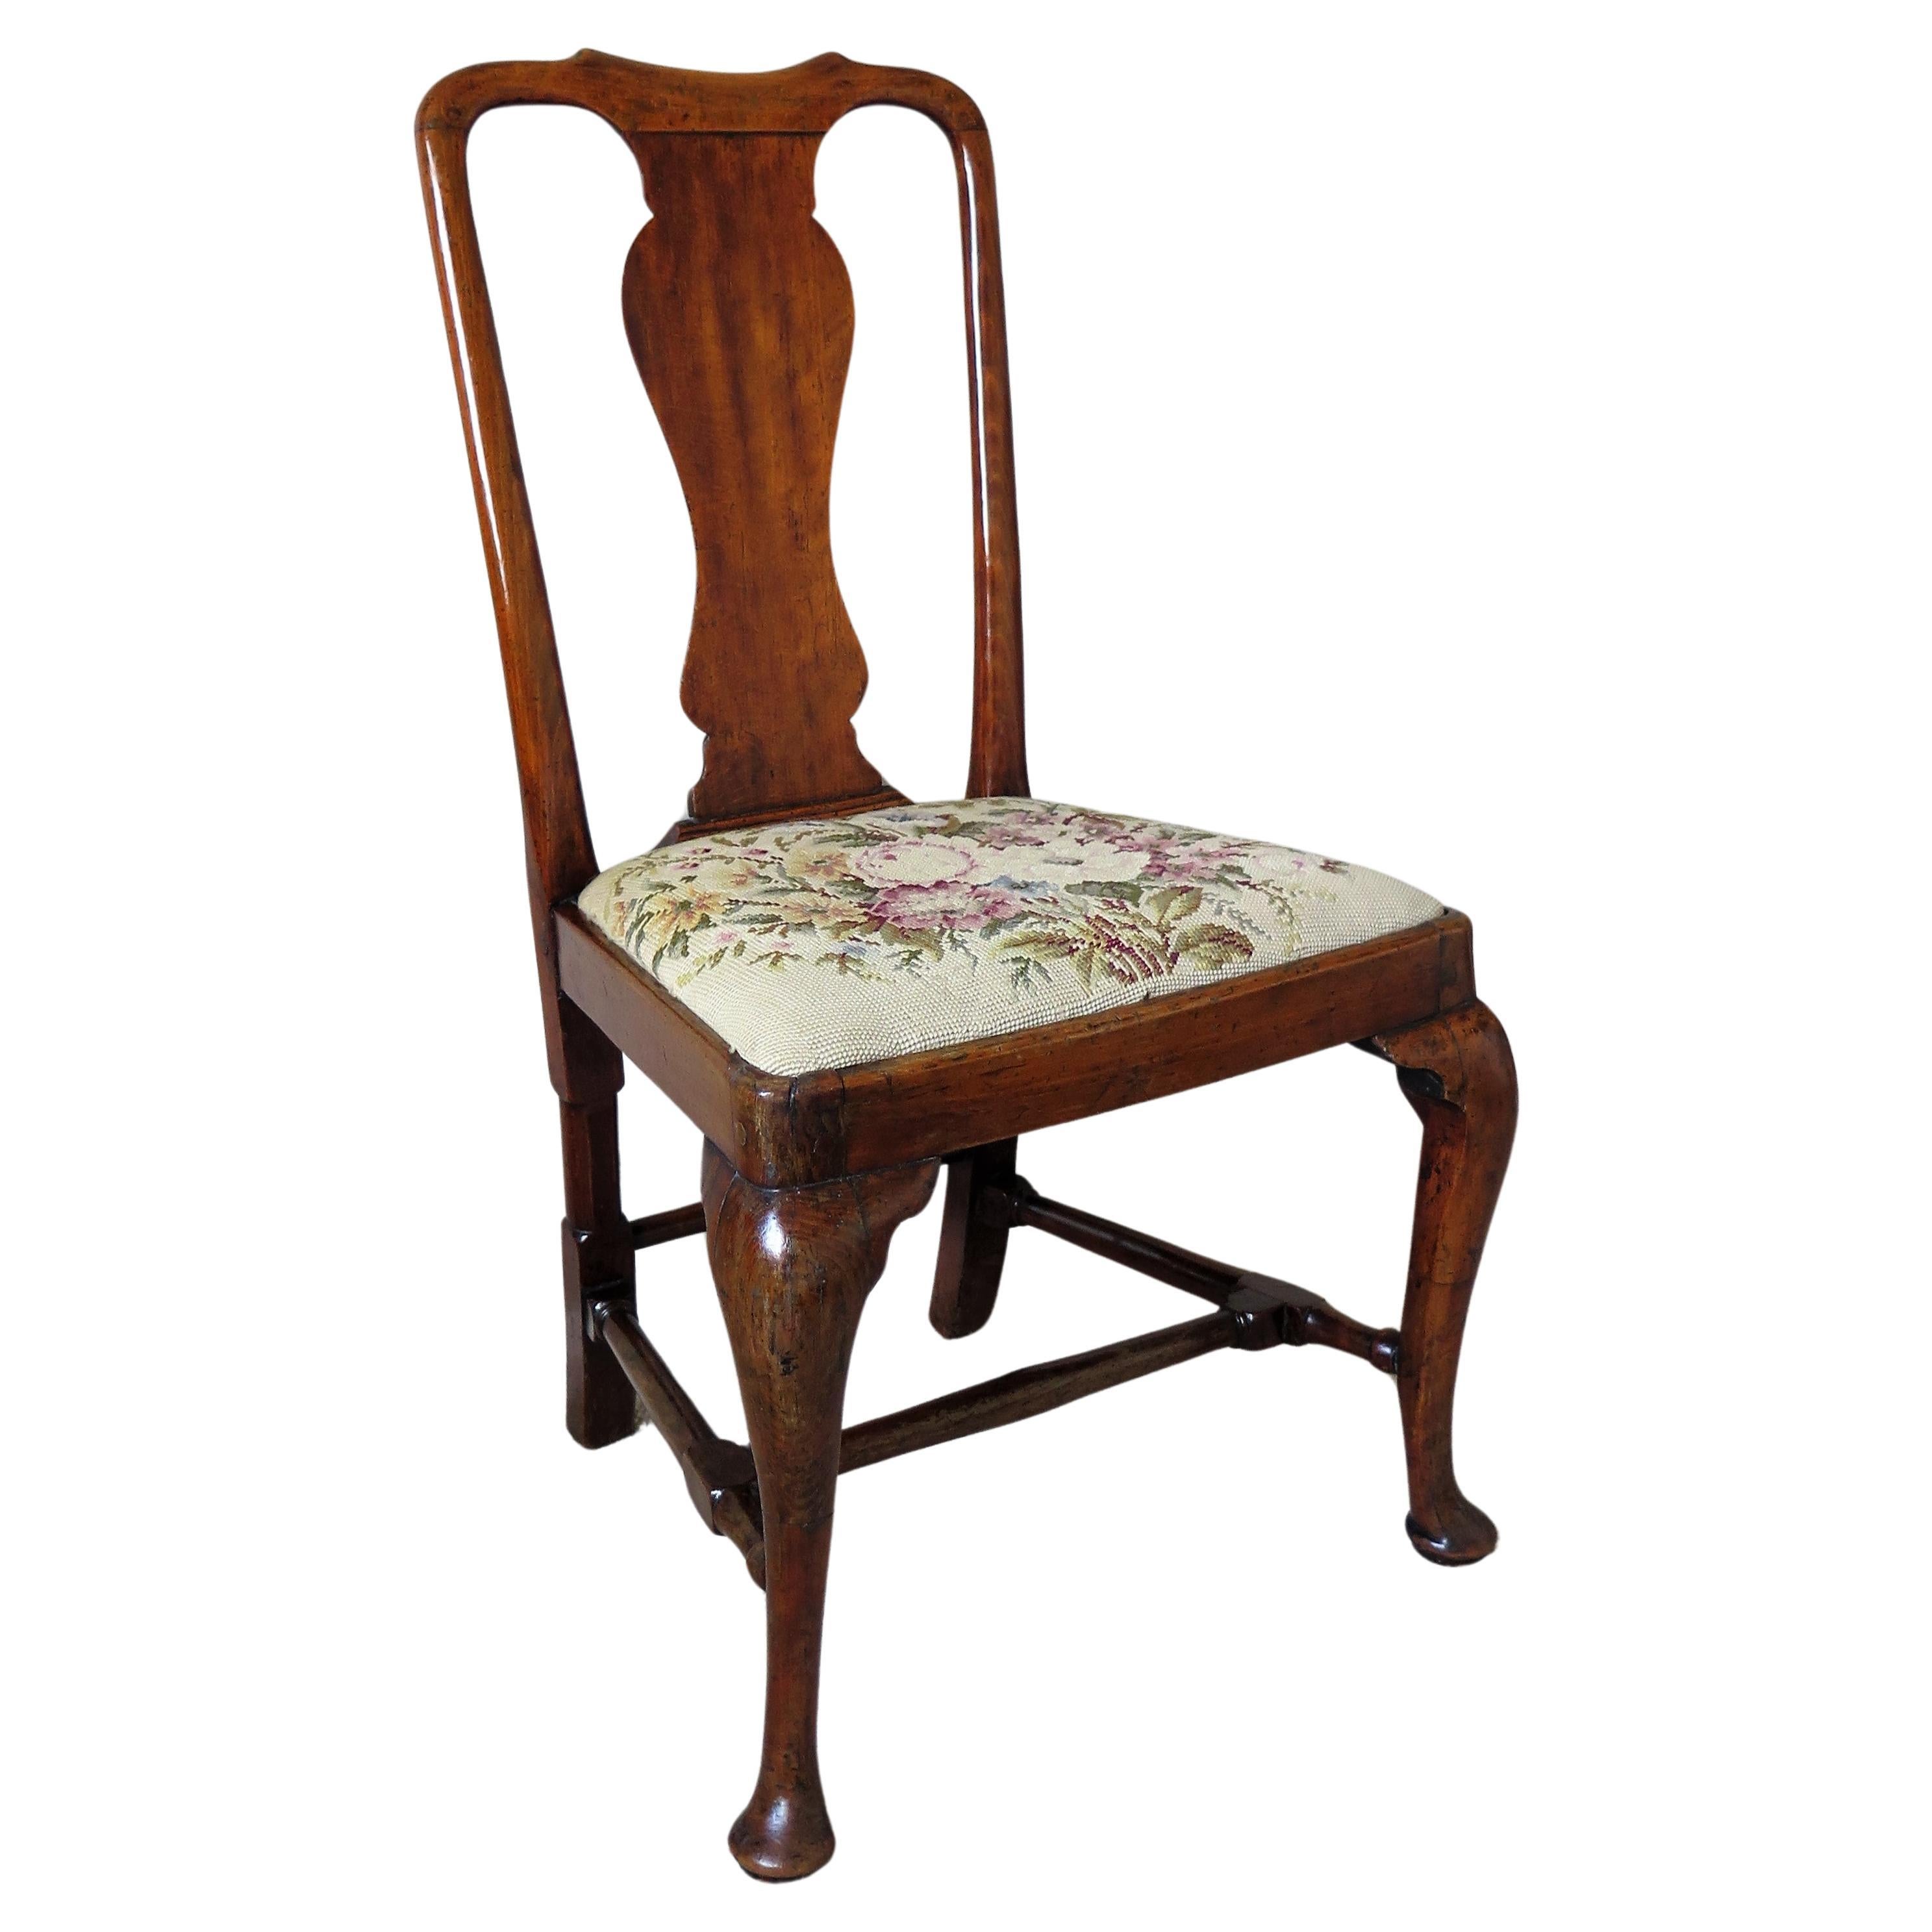 This is a classic English walnut chair from the Queen Anne period with a beautiful mellow color and dating to circa 1700-1710.

This is a very good example of this classic antique design with great character. It has a jointed and pegged